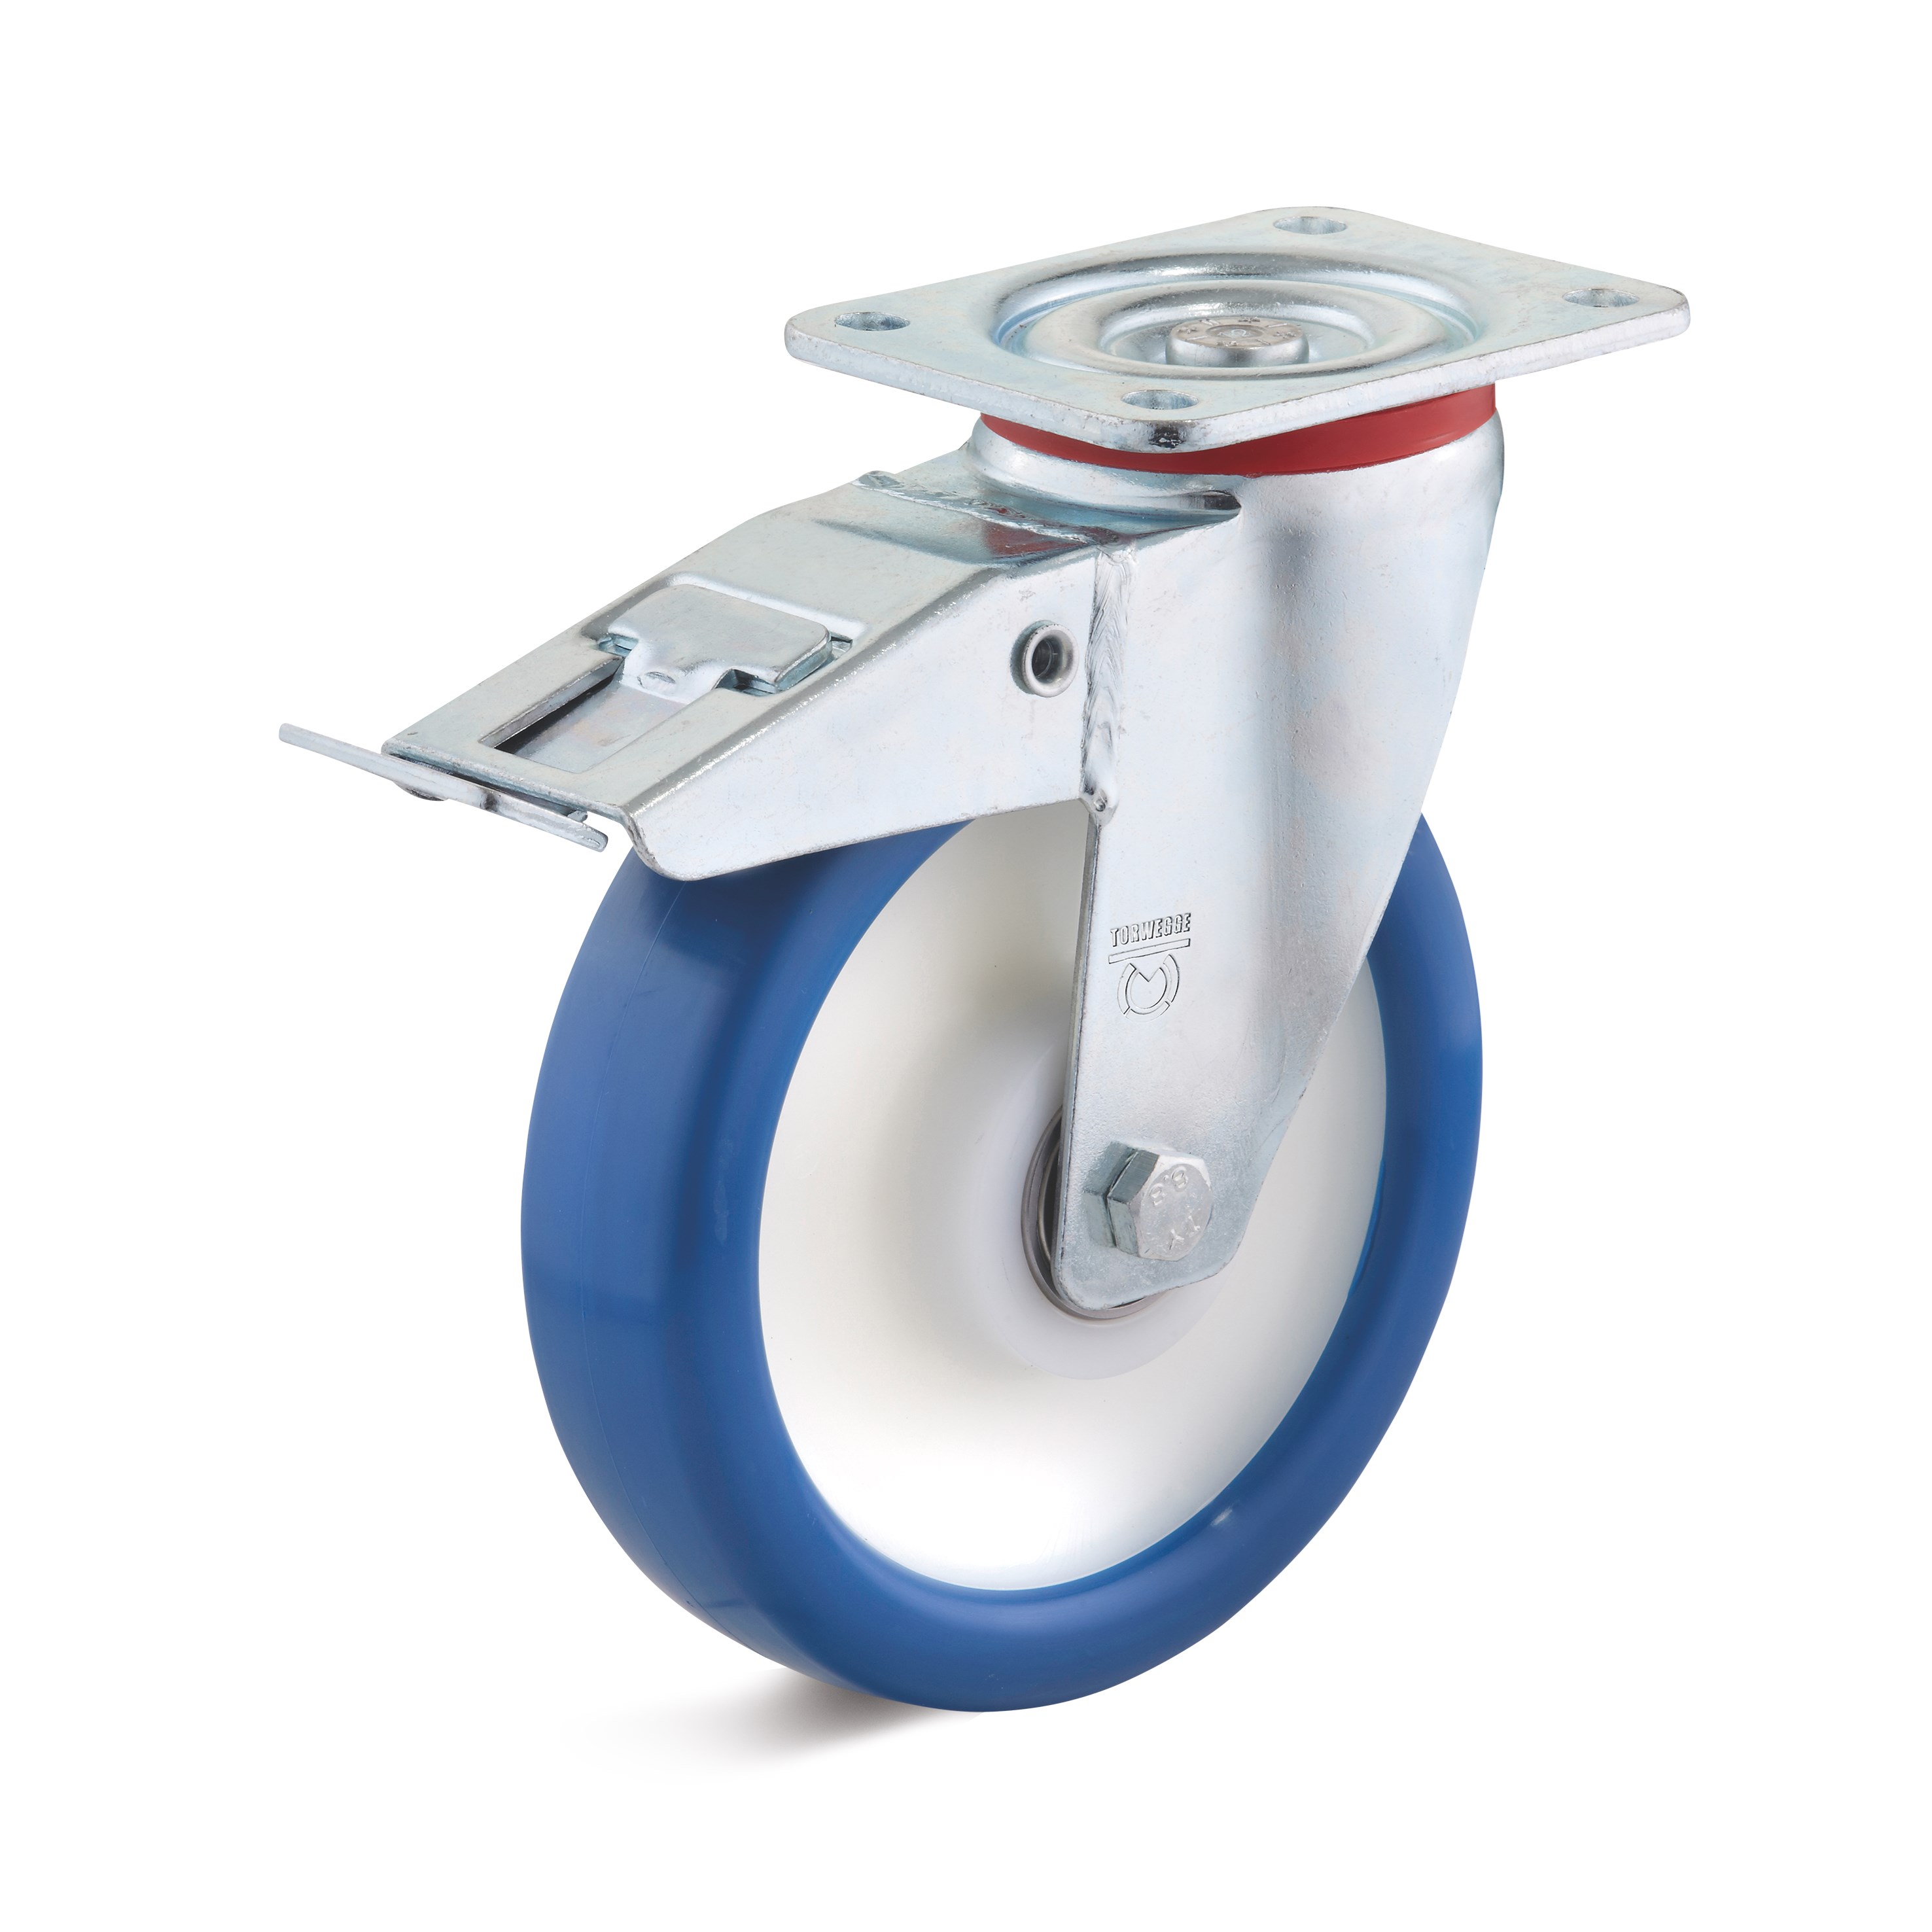 Swivel castor with double stop in the caster and elastic polyurethane wheel